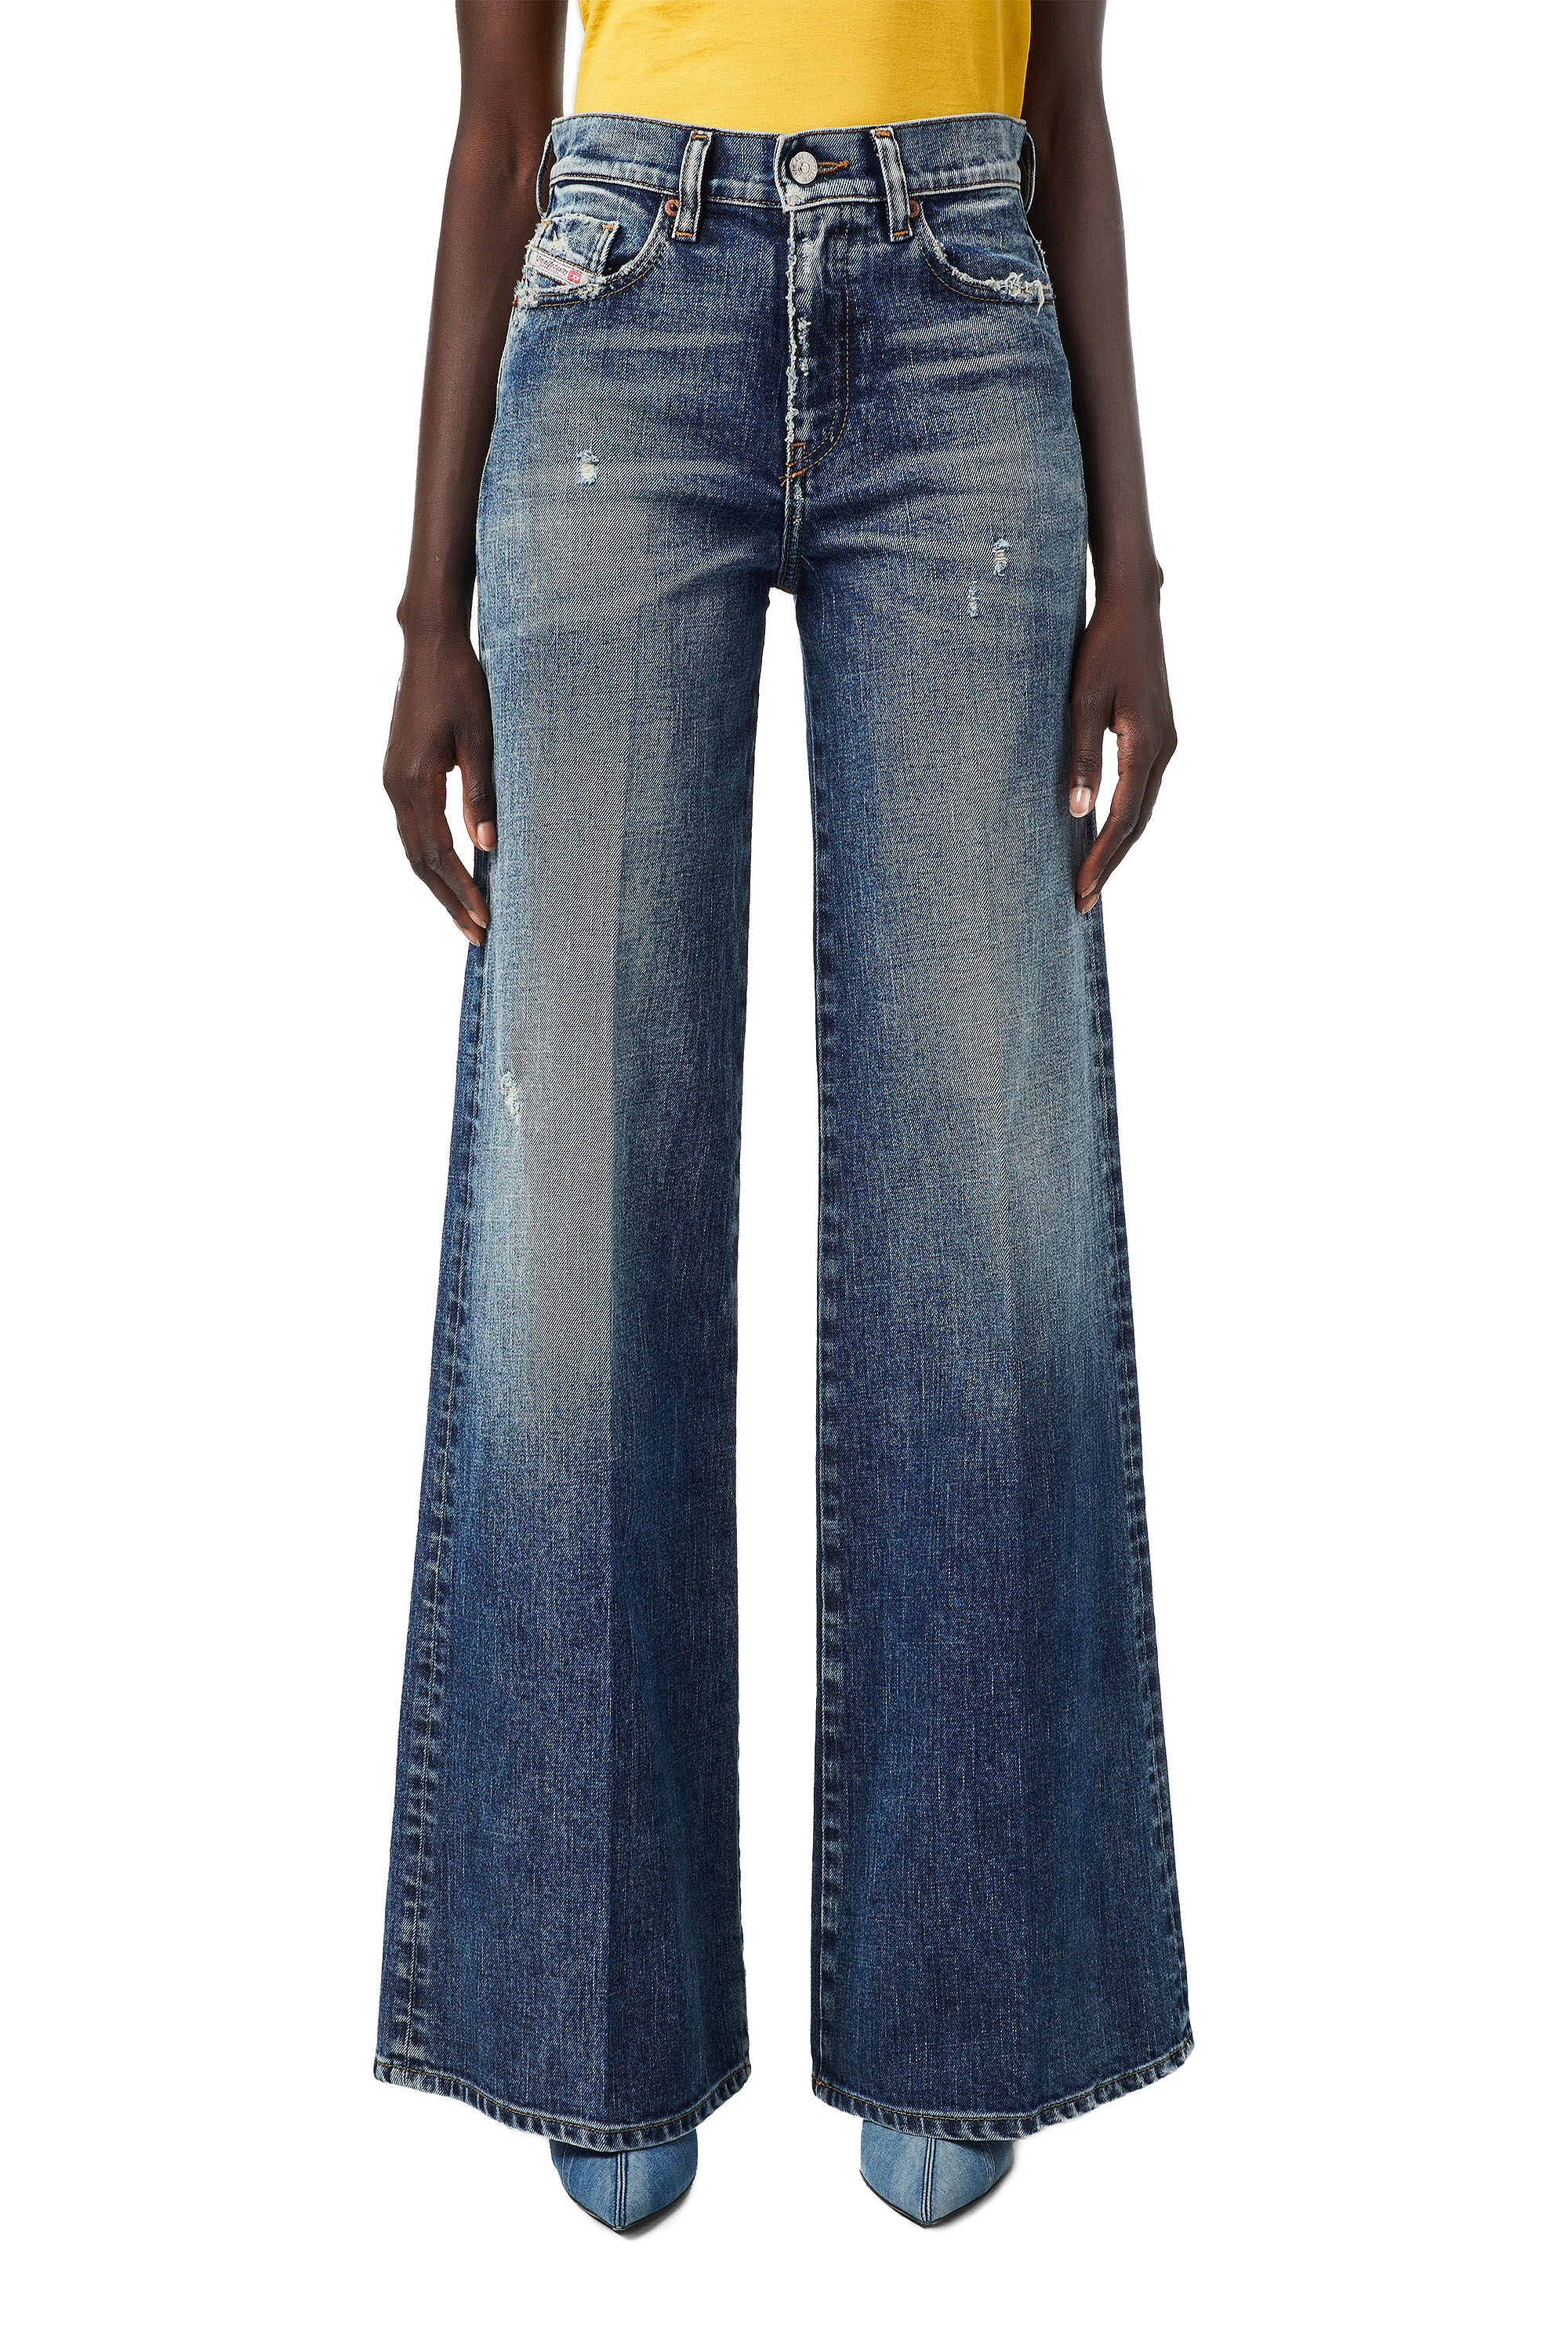 Diesel - D-Akemi 09B17 Bootcut and Flare Jeans,  - Image 3